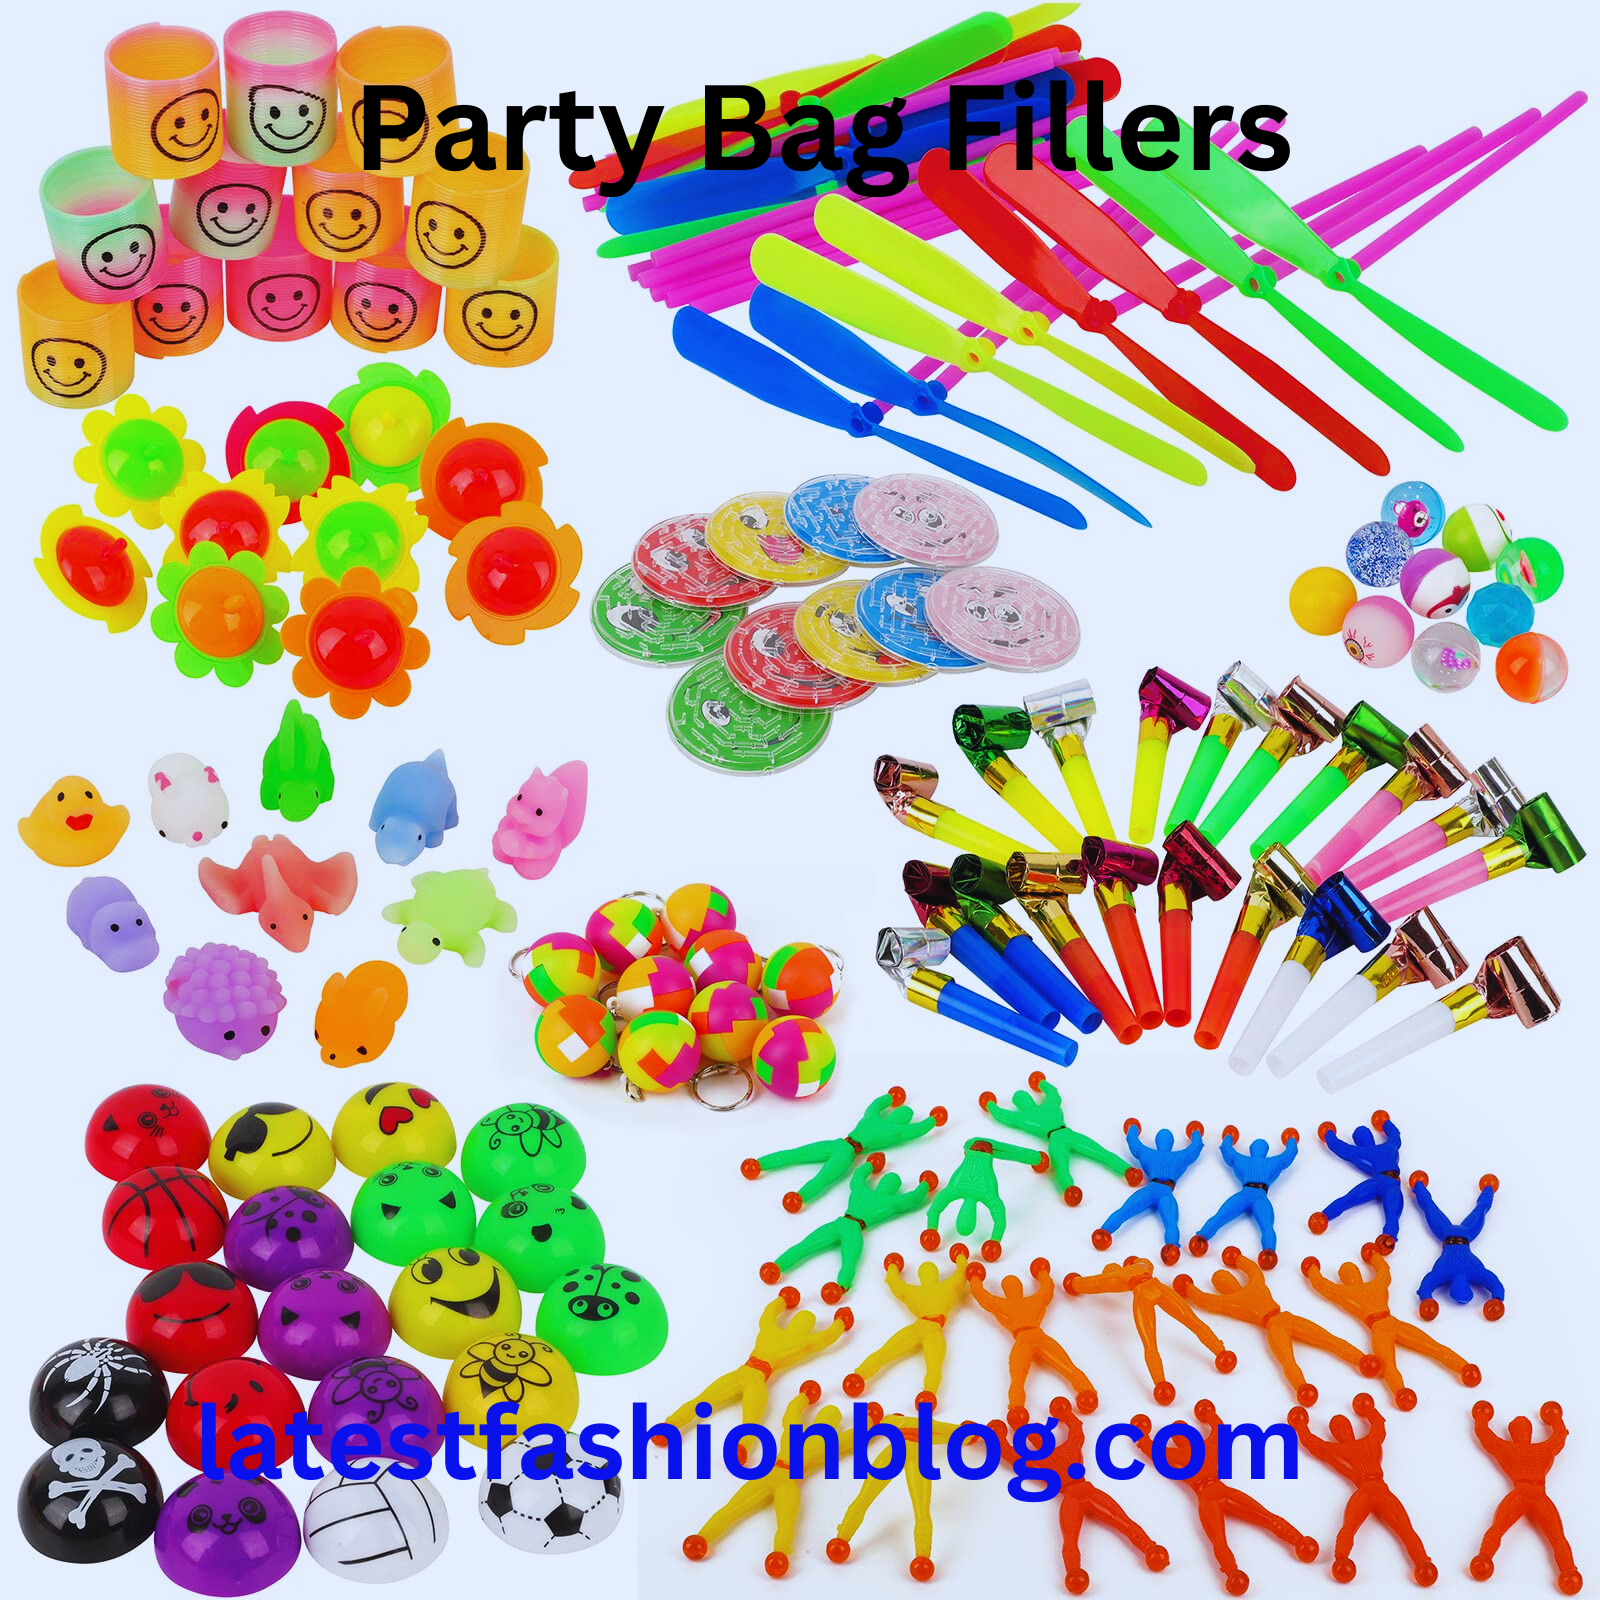 Party Bag Fillers